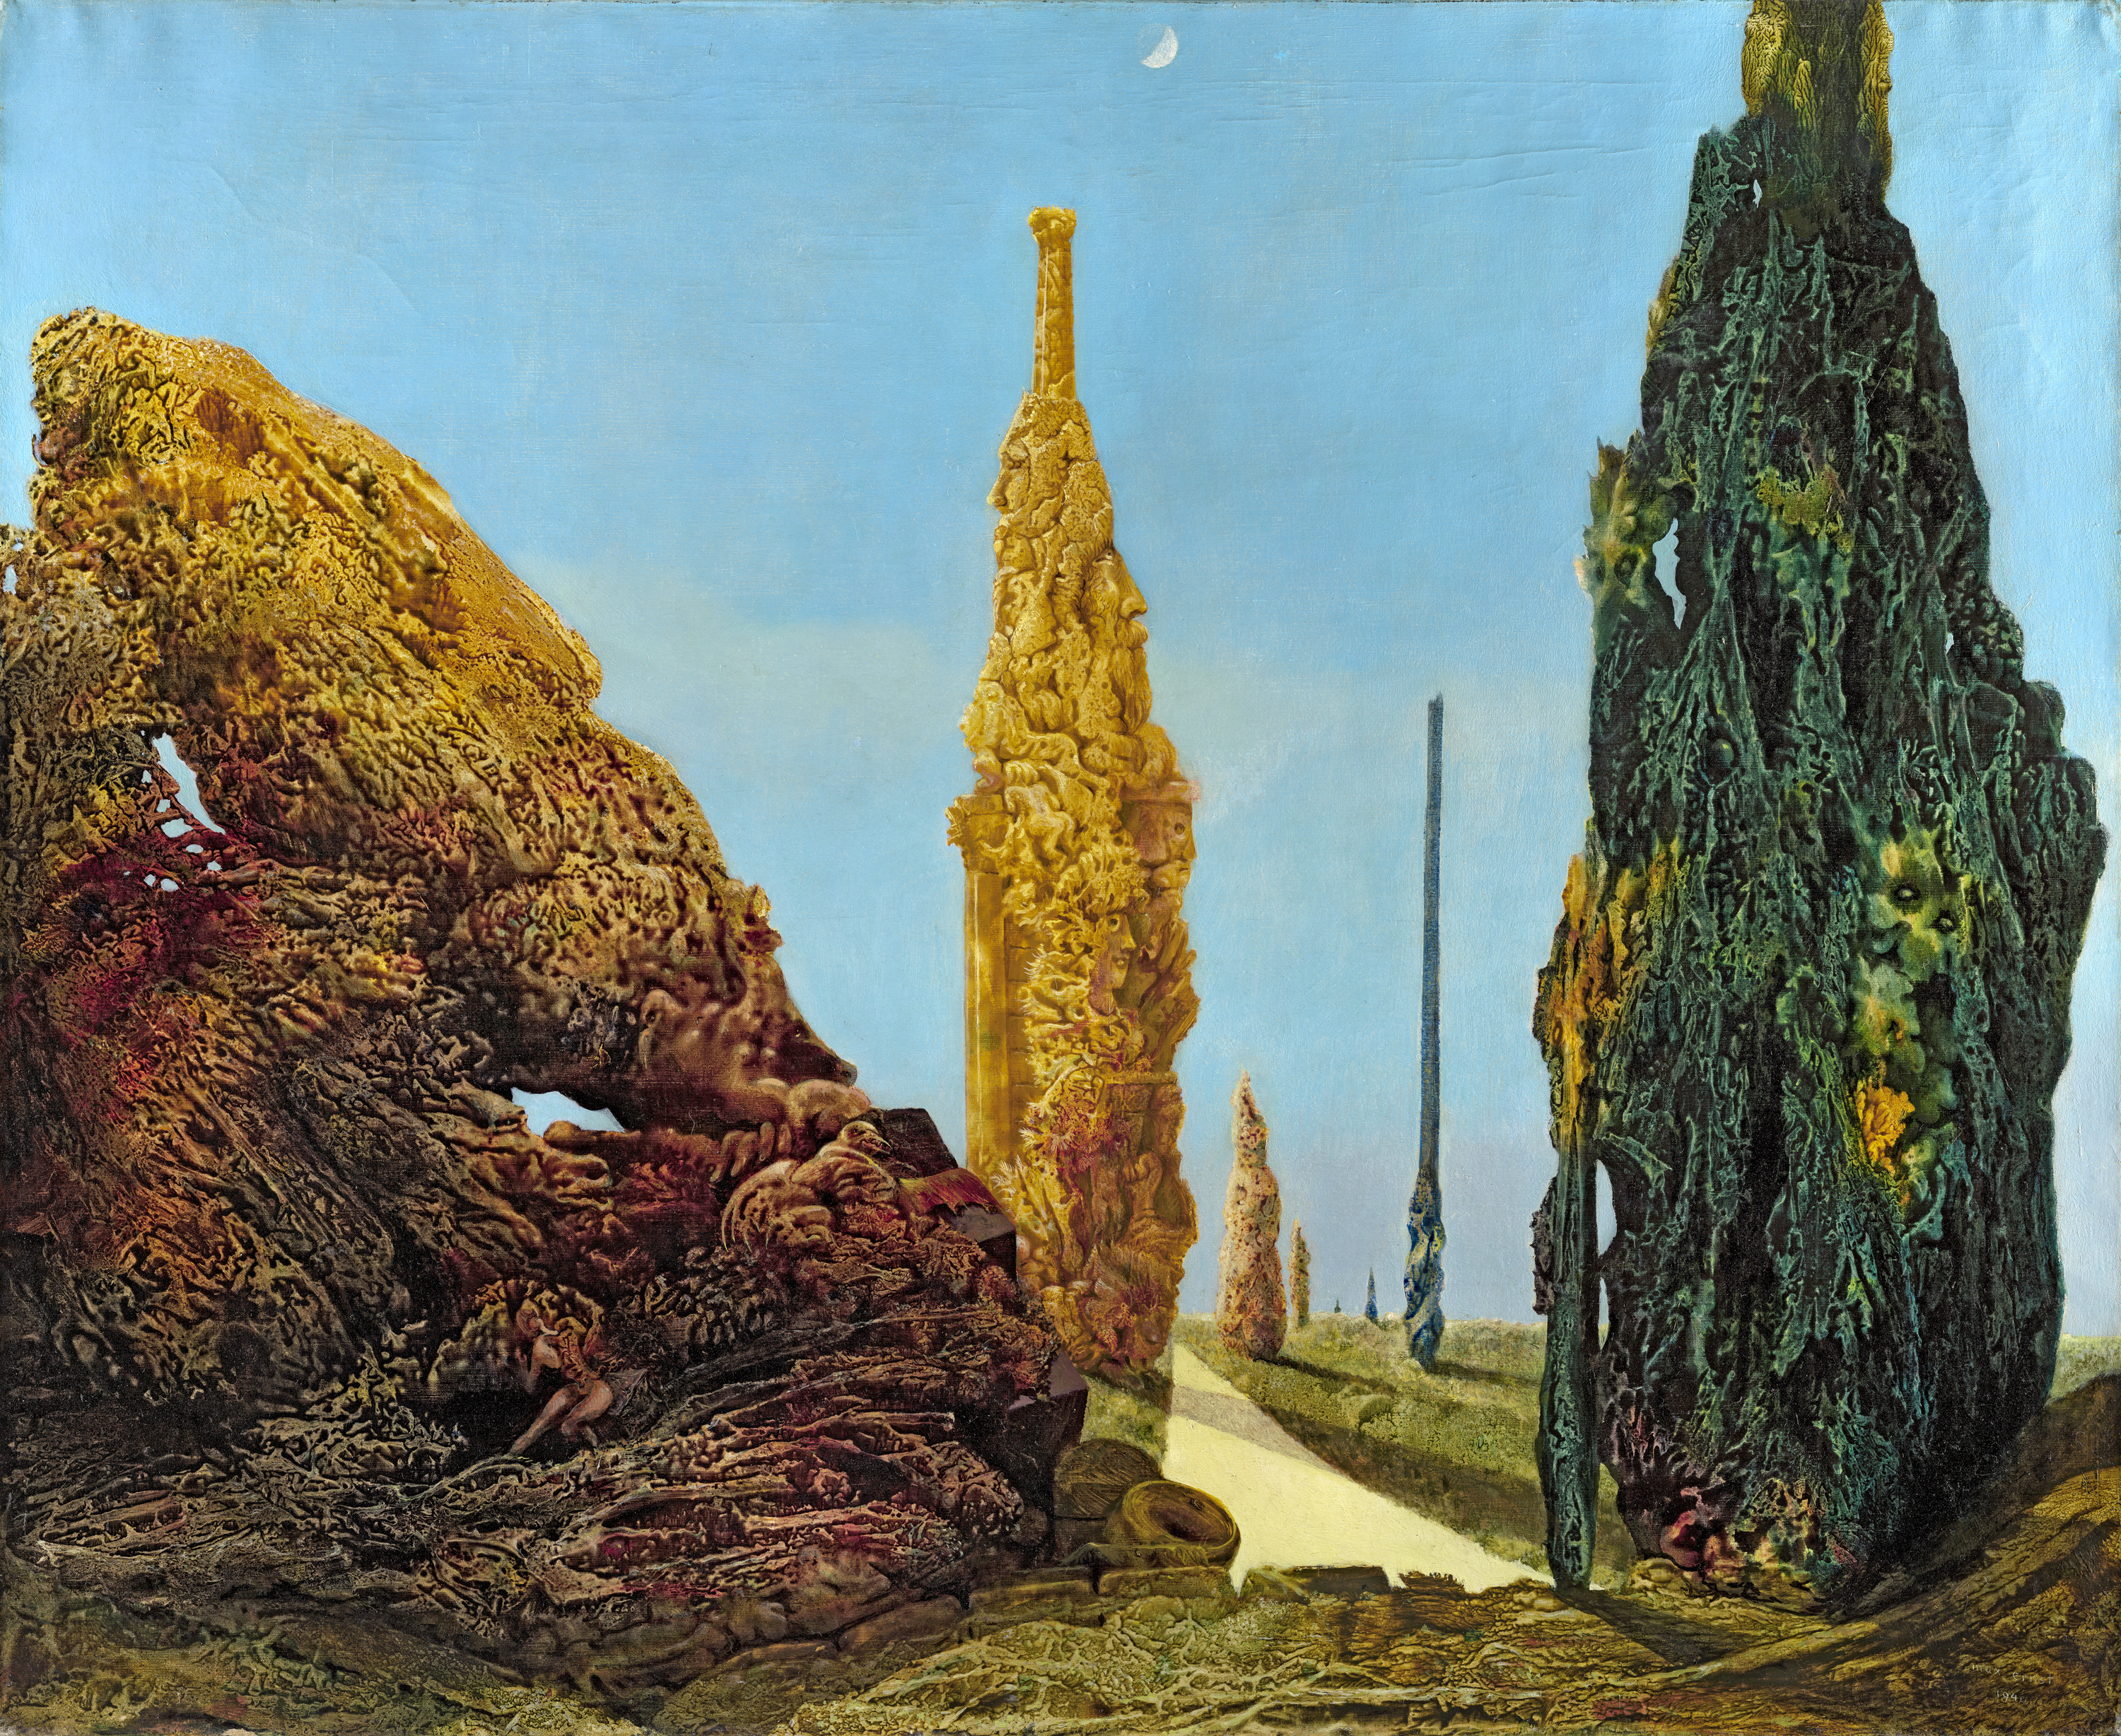 Solitary and Conjugal Trees by Max Ernst